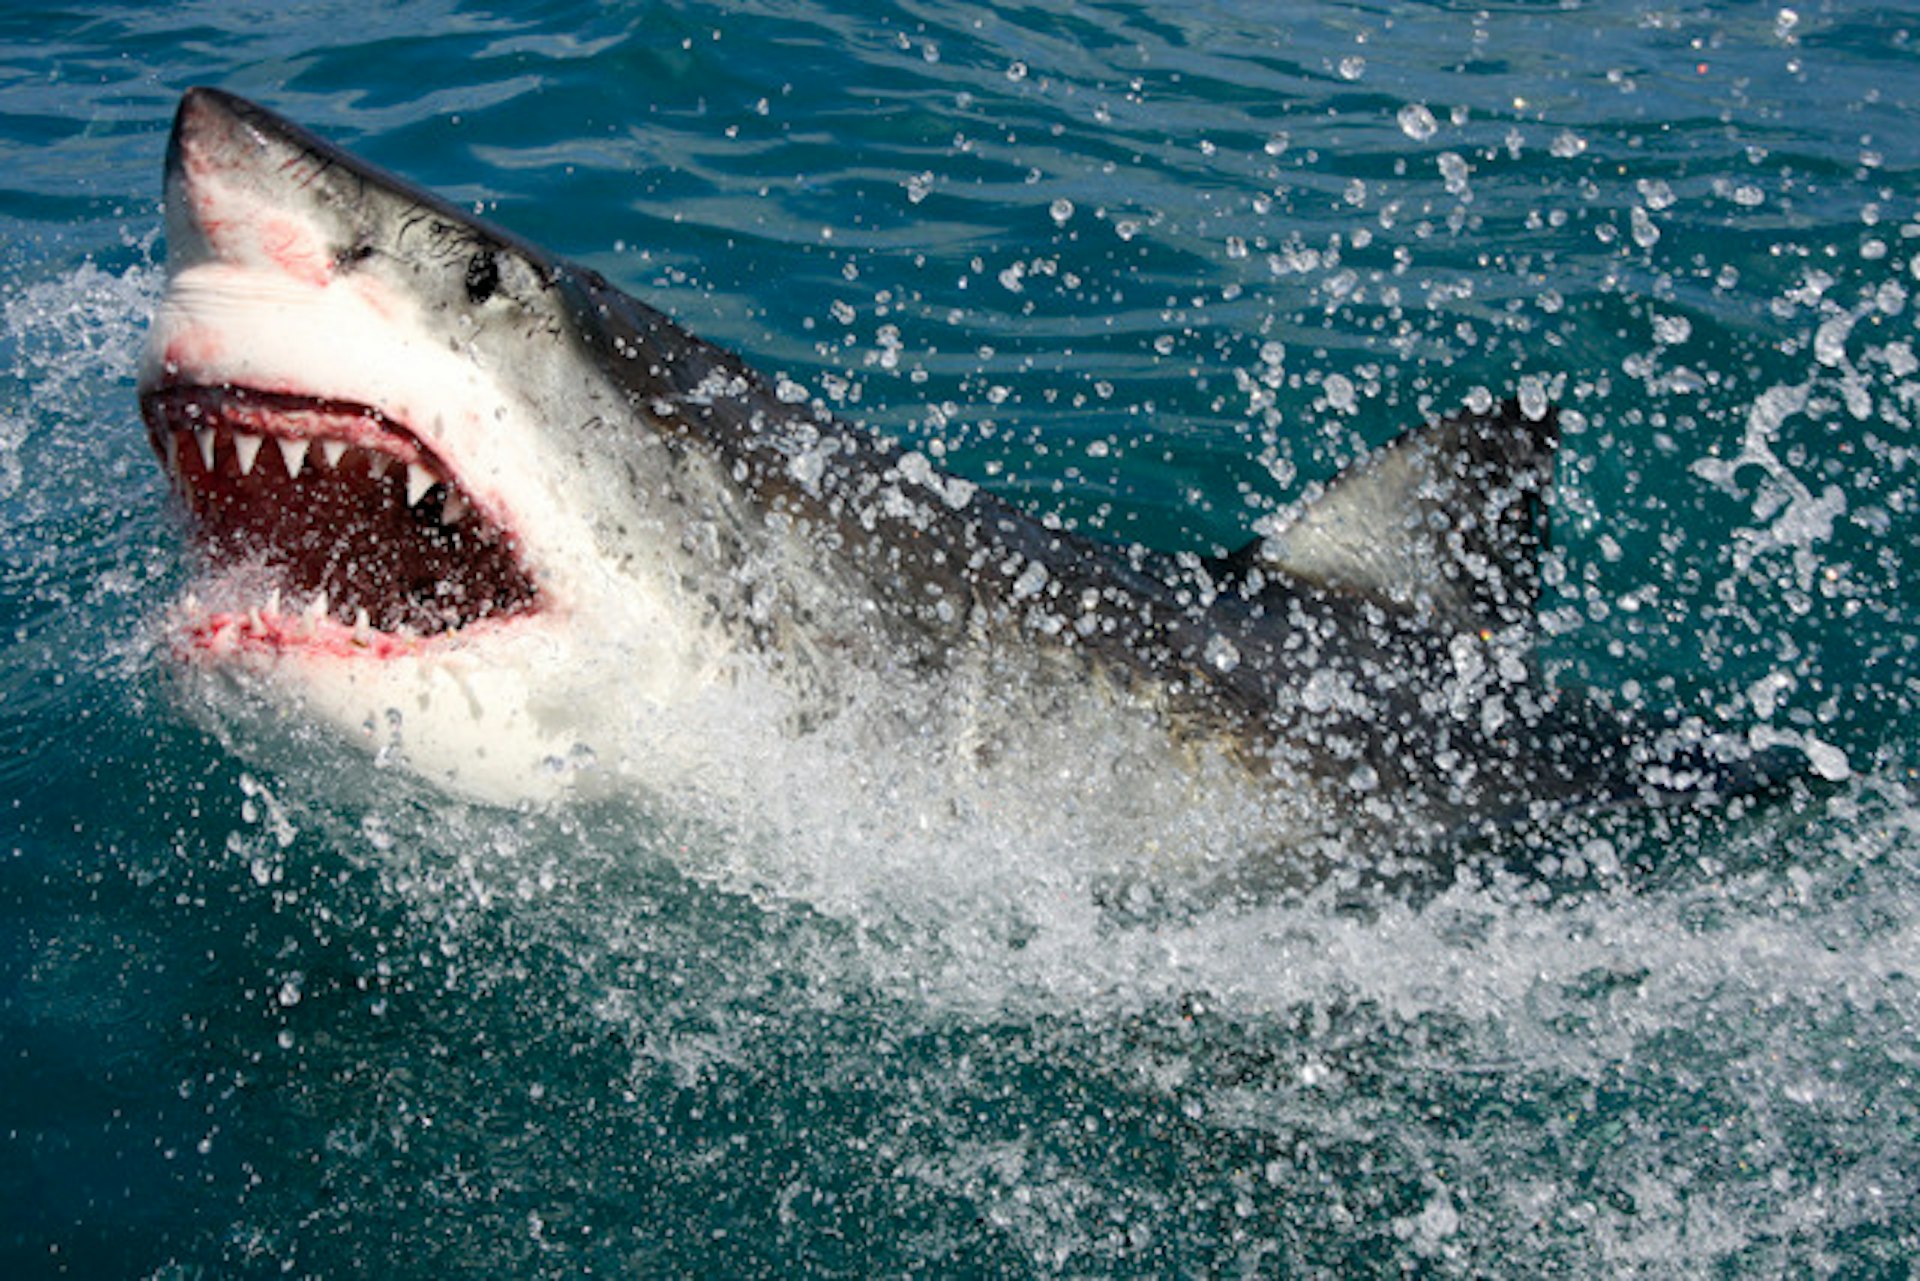 Great white shark with open mouth breaches water